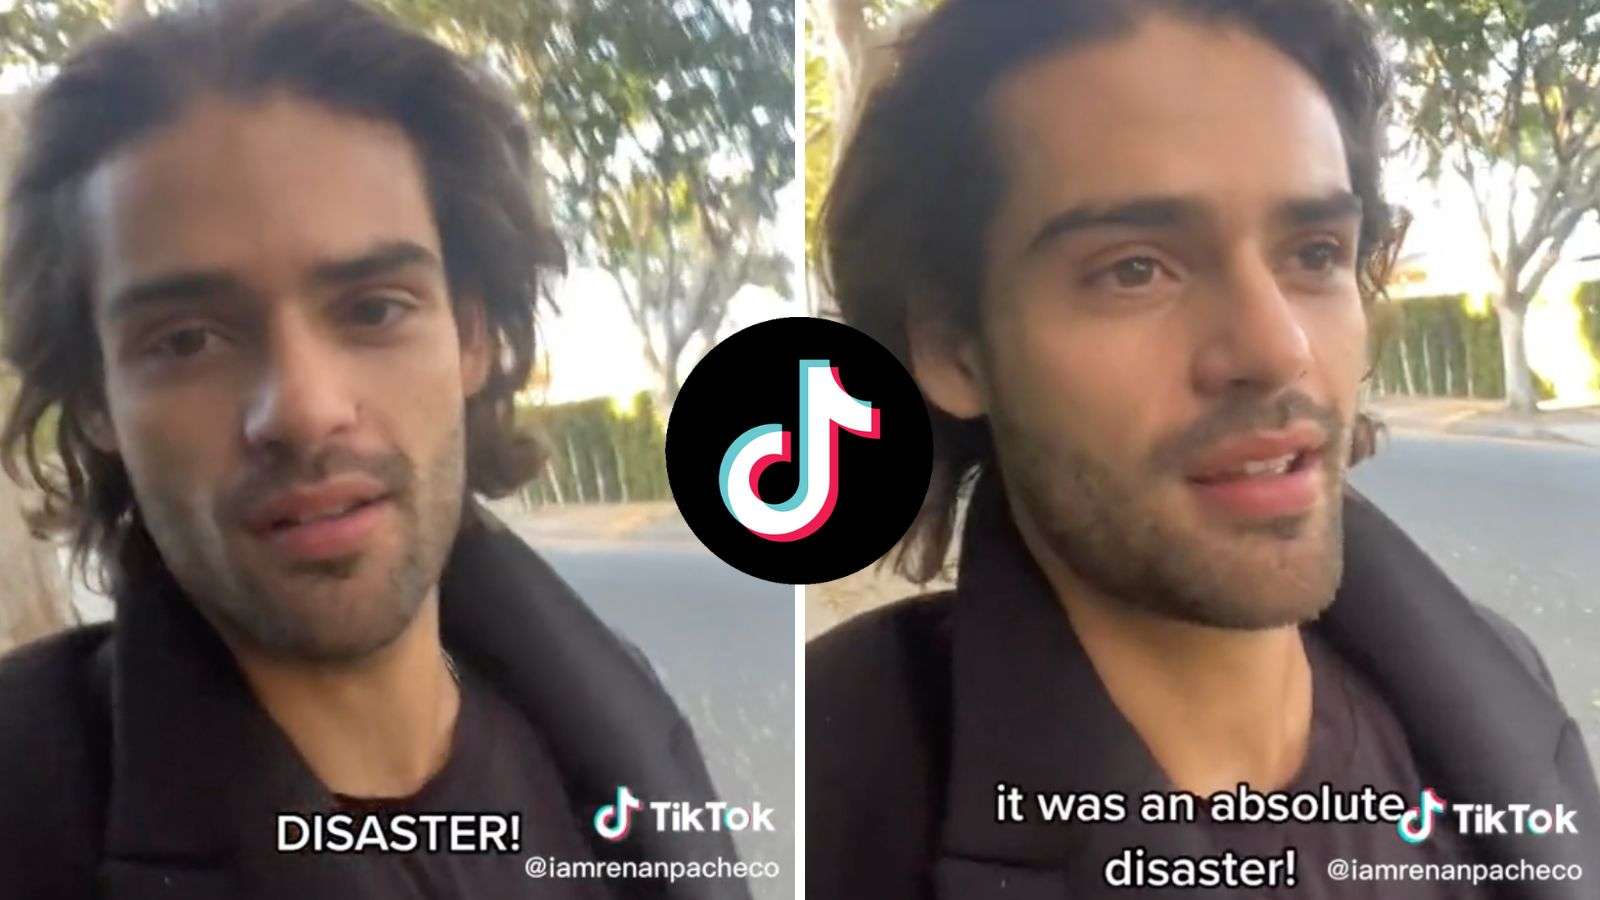 TikToker goes viral after storming out of first date due to woman's diet requirements